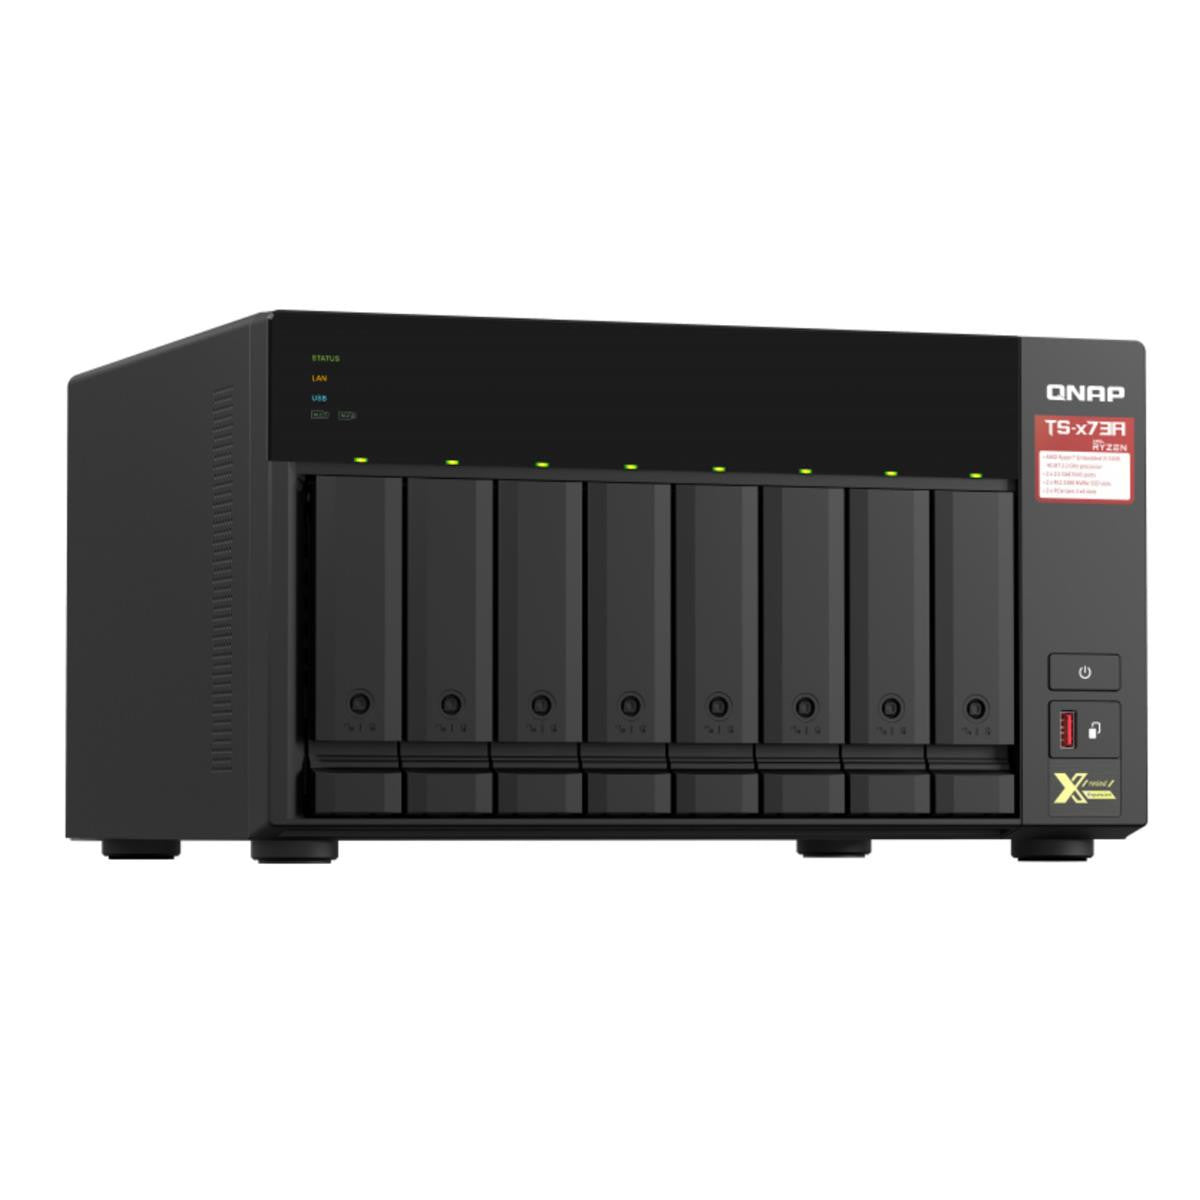 QNAP TS-873A 8-BAY NAS with 64GB DDR4 RAM and 32TB (8x4TB) Seagate Ironwolf NAS Drives Fully Assembled and Tested